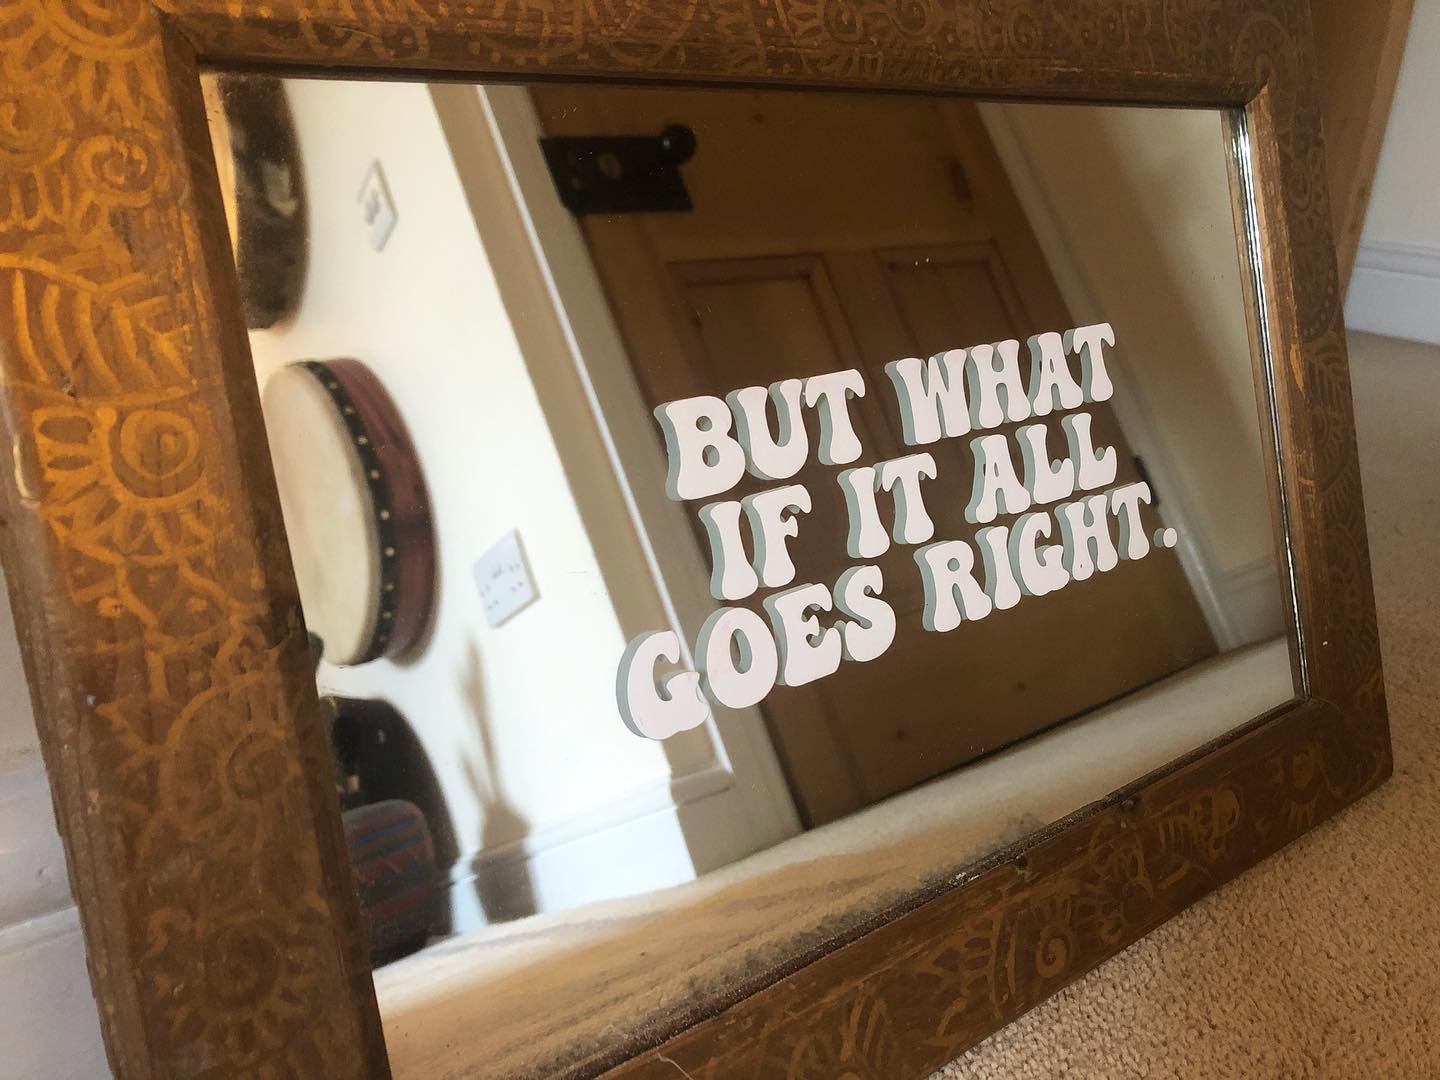 I bought this mirror in honour of a client who&rsquo;s favourite saying was:

&ldquo;Yeah but what if&hellip;&rdquo; typically followed by some catastrophic fantasy that dooms her to the depths of hell. 

And of course, so many of us get caught in th